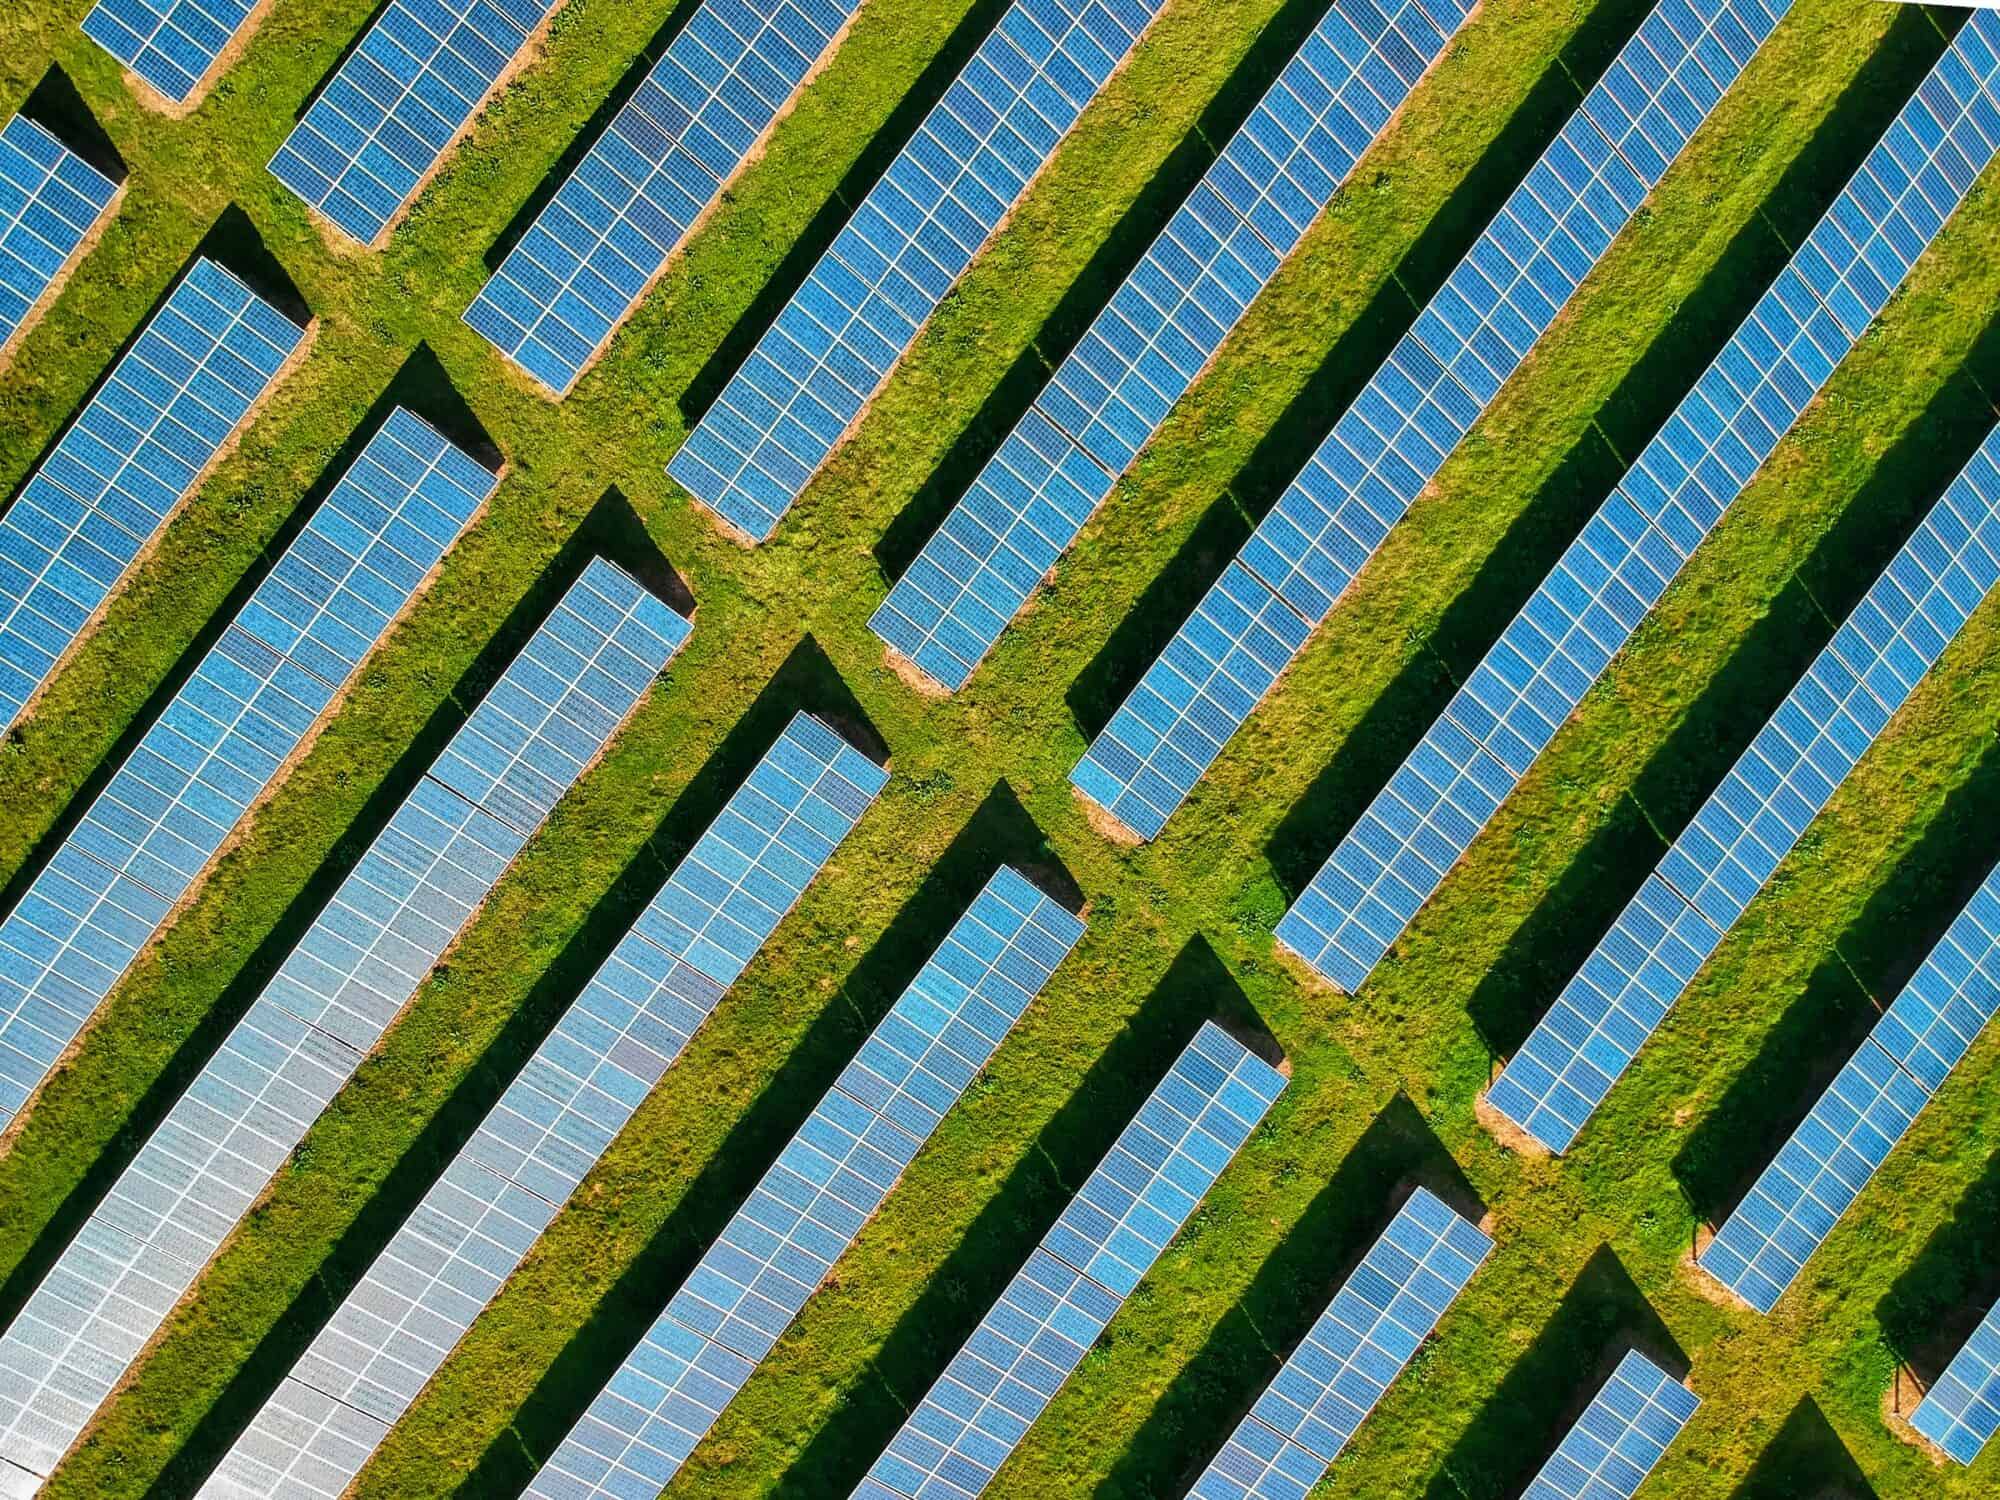 Aerial view of a photovoltaic solar electricity farm.